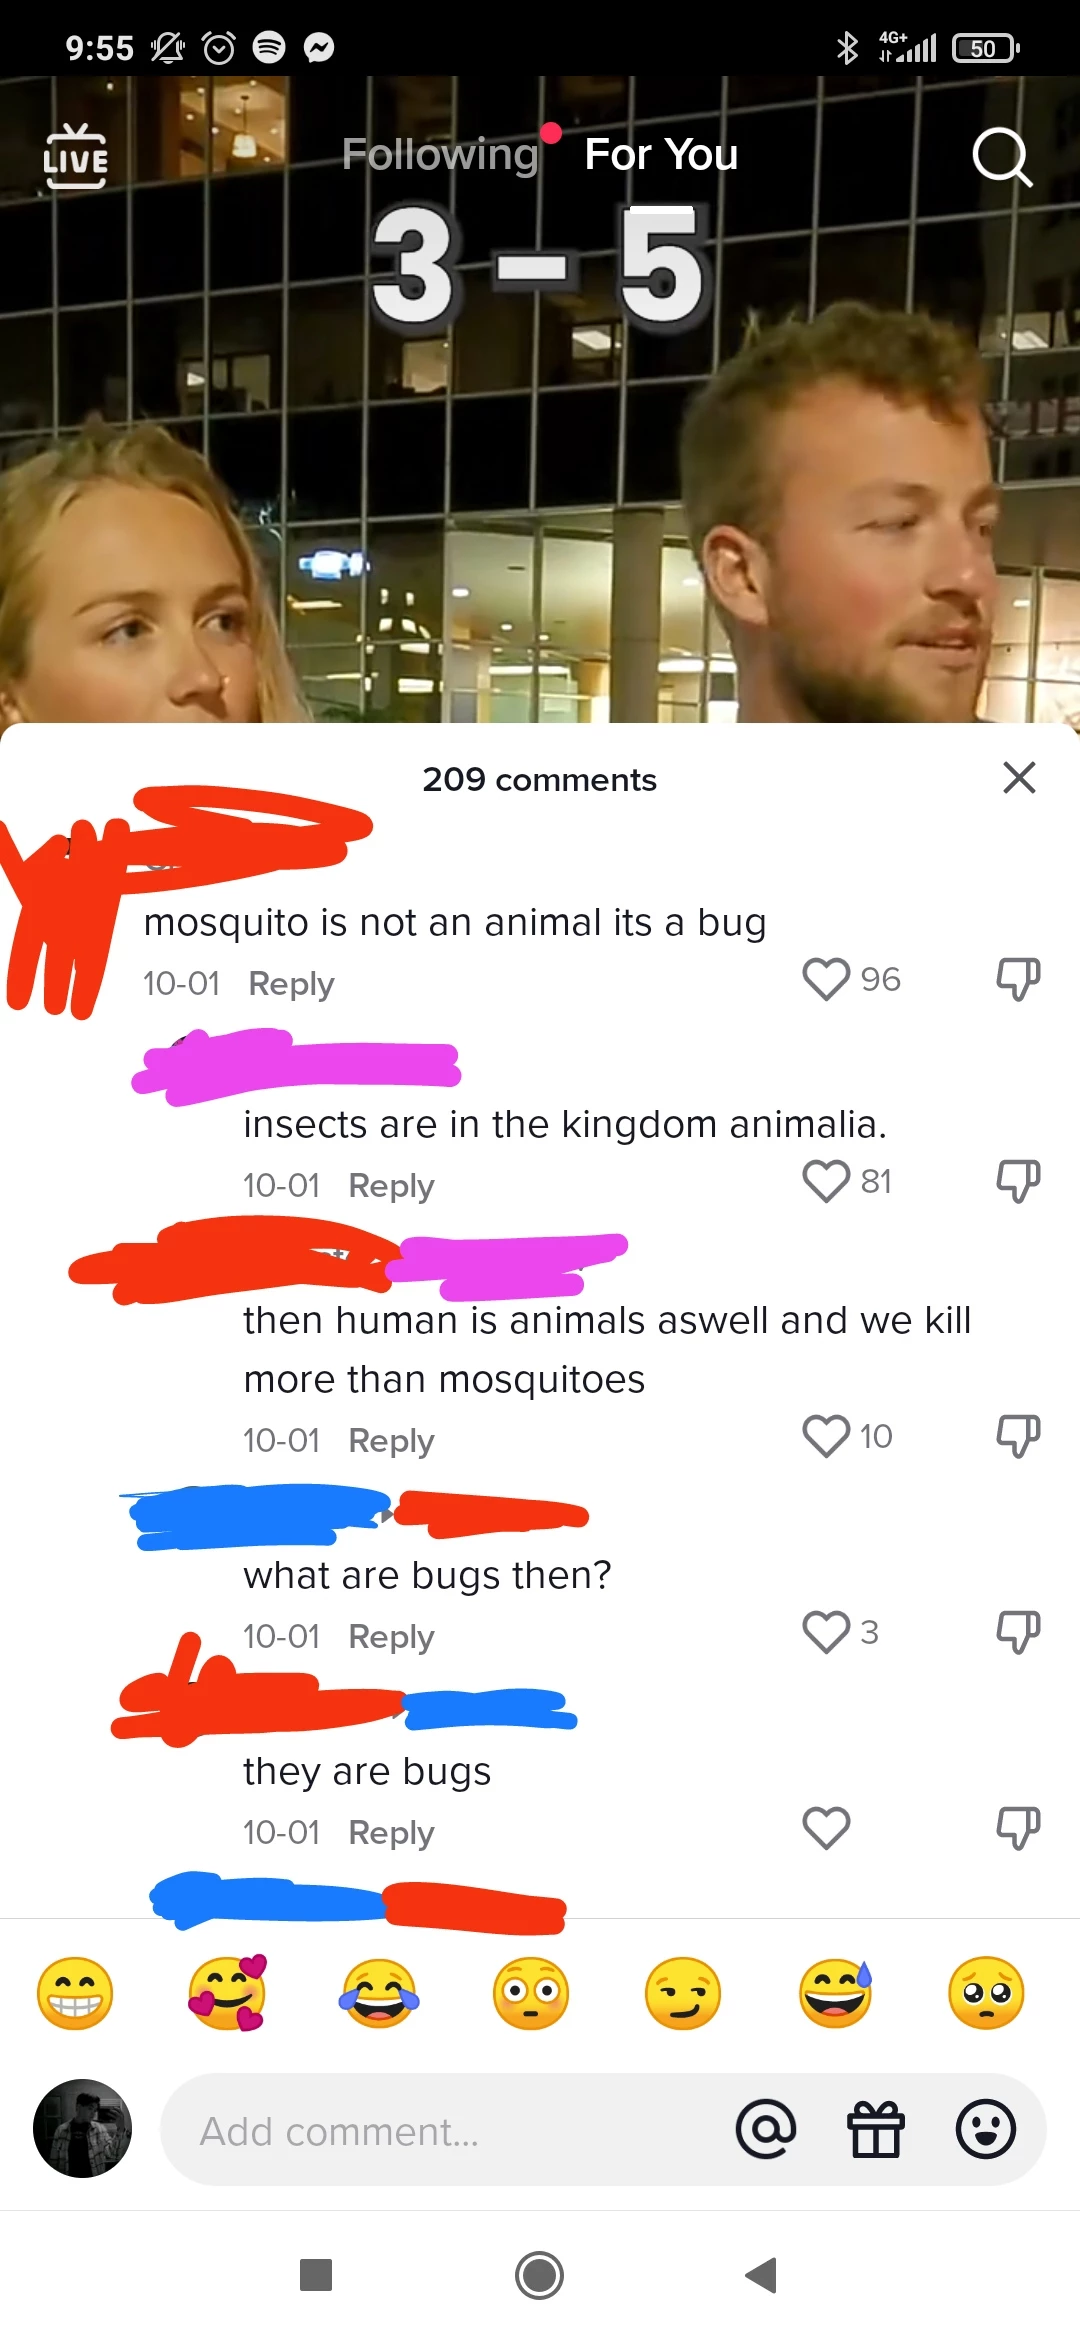 What Are Bugs Then